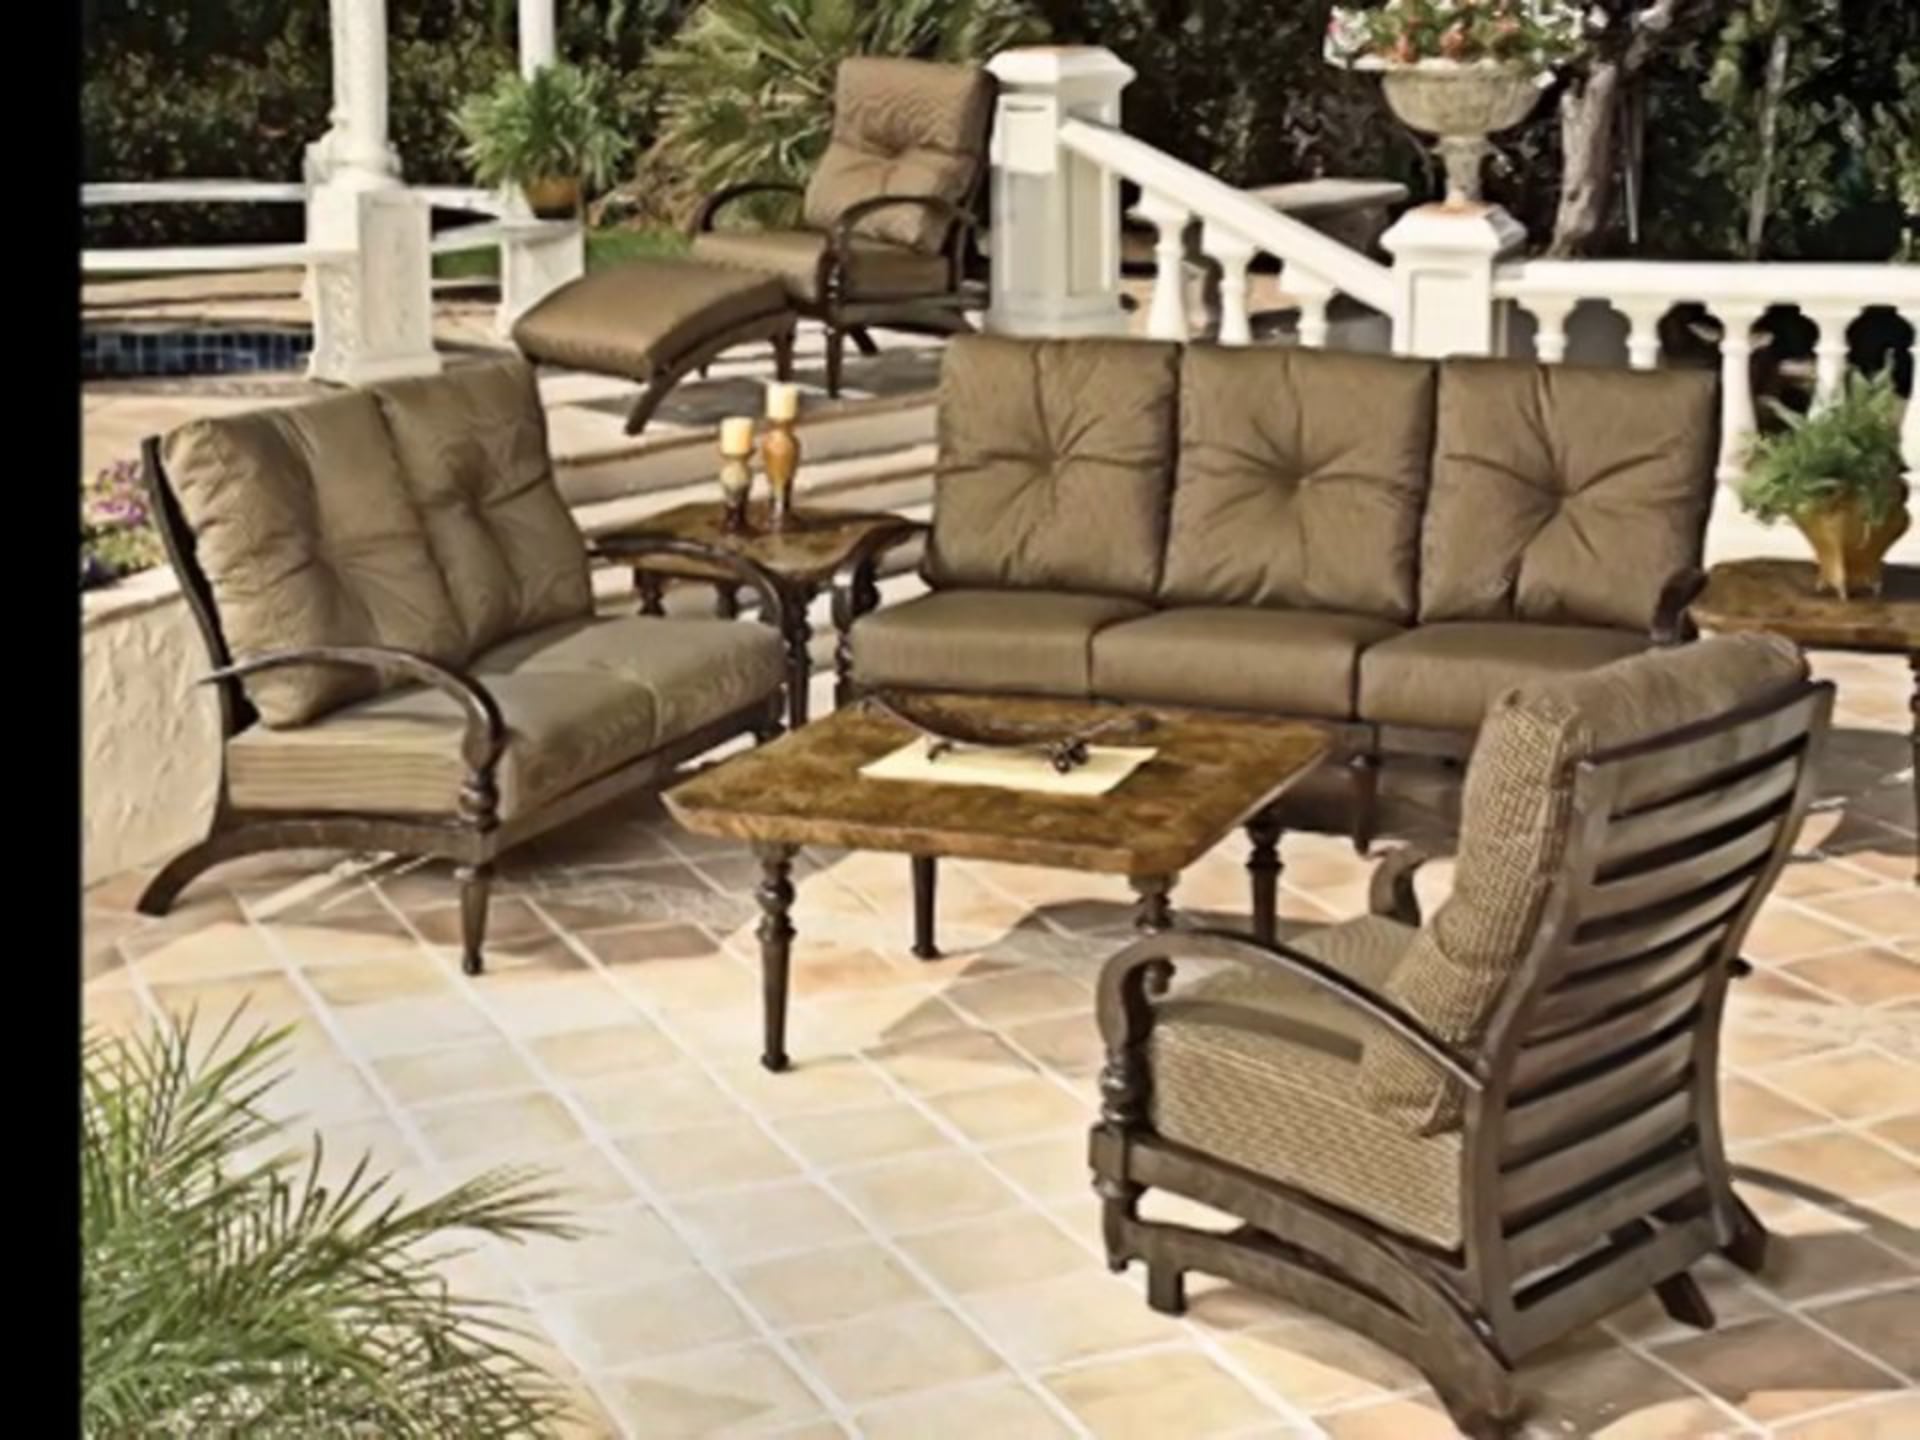 Inexpensive Patio Furniture : 10 Must Buy Best Cheap Patio Furniture ...